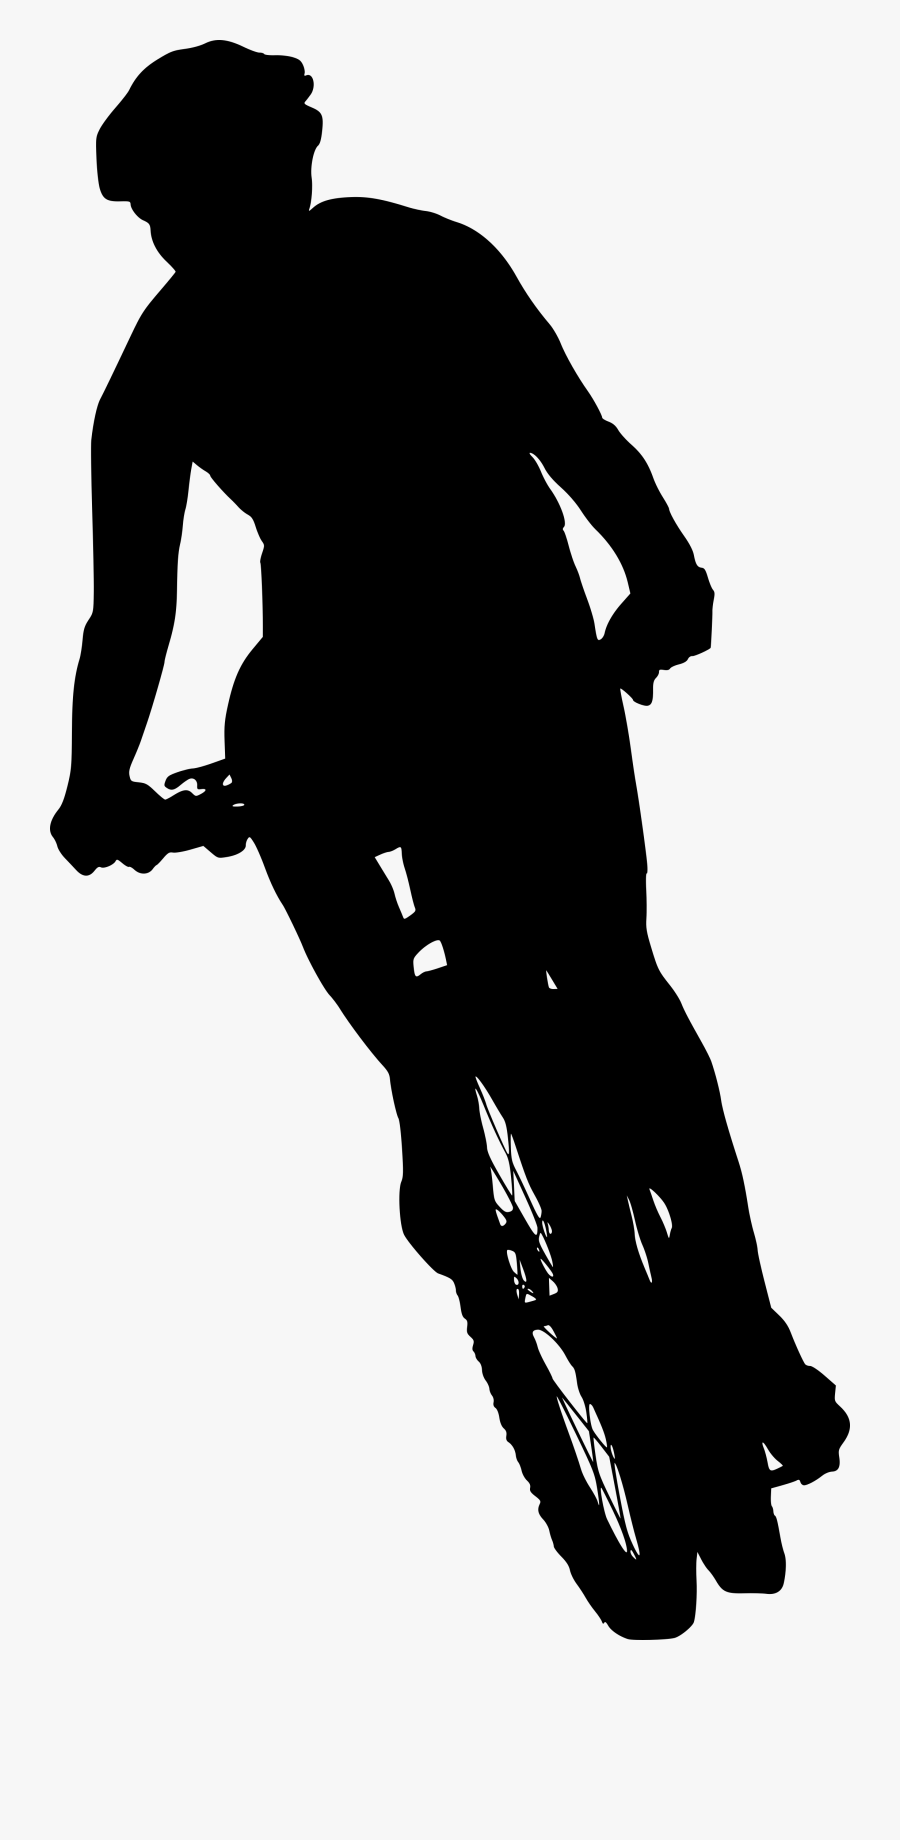 6 Bicycle Ride Silhouette Front View Png Transparent - Black Shadow In Bike Png, Transparent Clipart